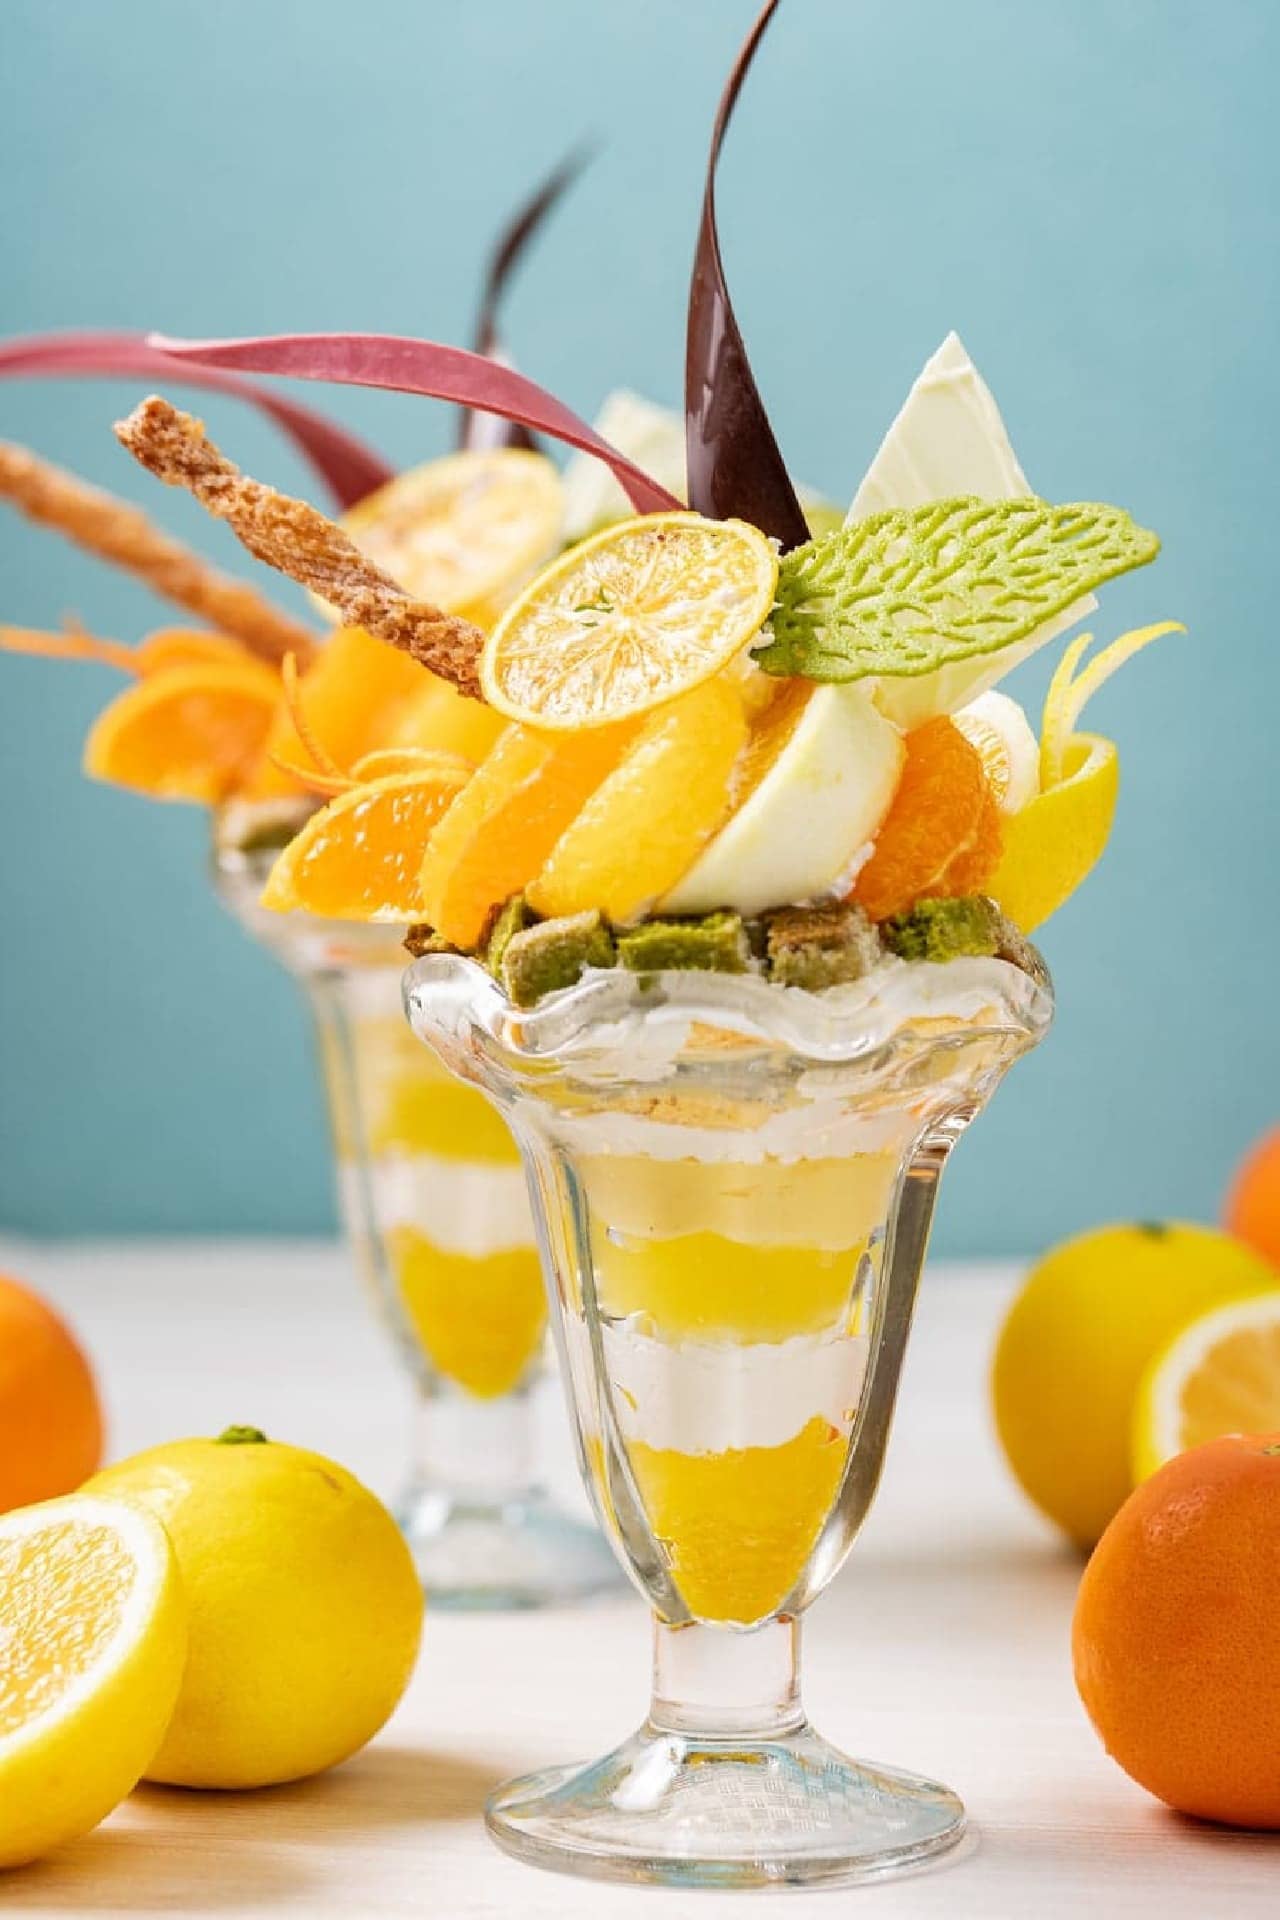 Izu Imaihama Tokyu Hotel to Offer "Izu Citrus Parfait" Using Izu Citrus Fruits for a Limited Time Starting May 11, Offering Refreshing Taste Perfect for Early Summer Image 2